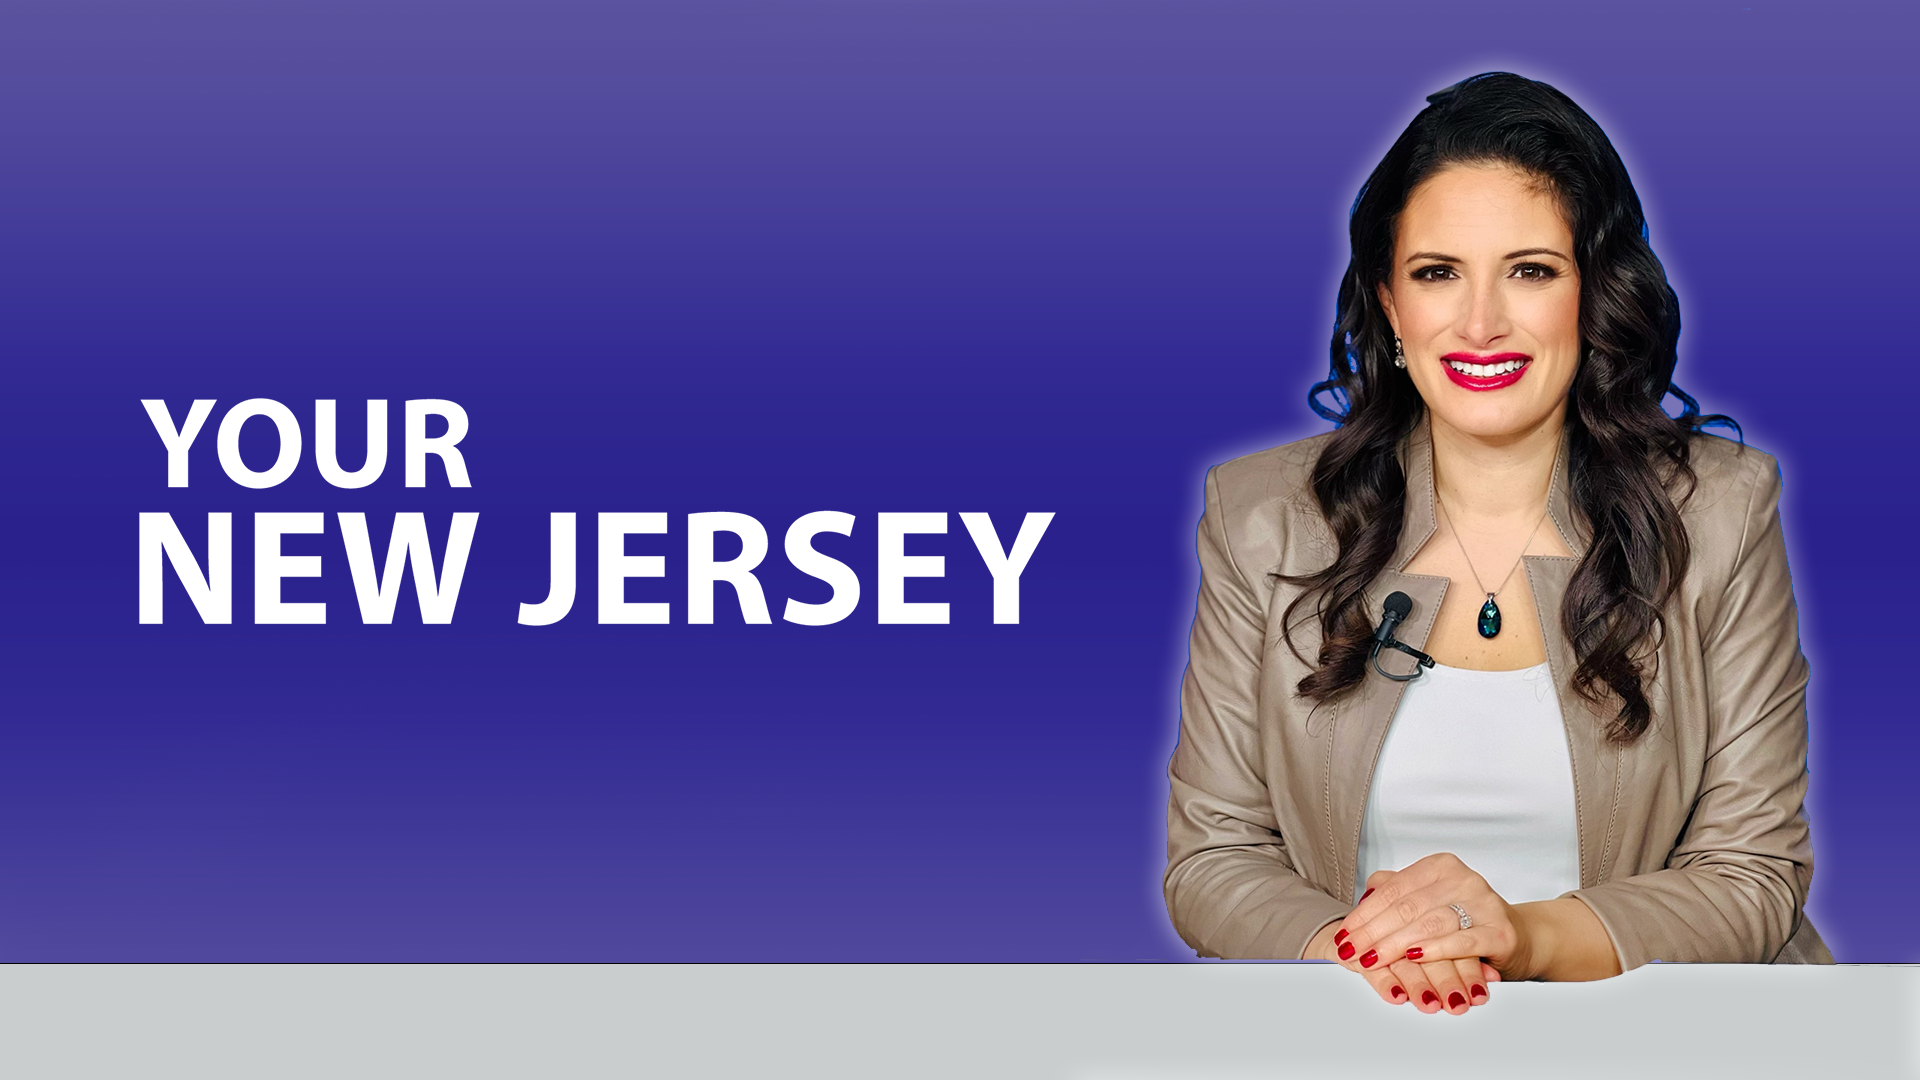 Your New Jersey (146): Valley Breast Imaging Center & NJ’s Holiday Attractions